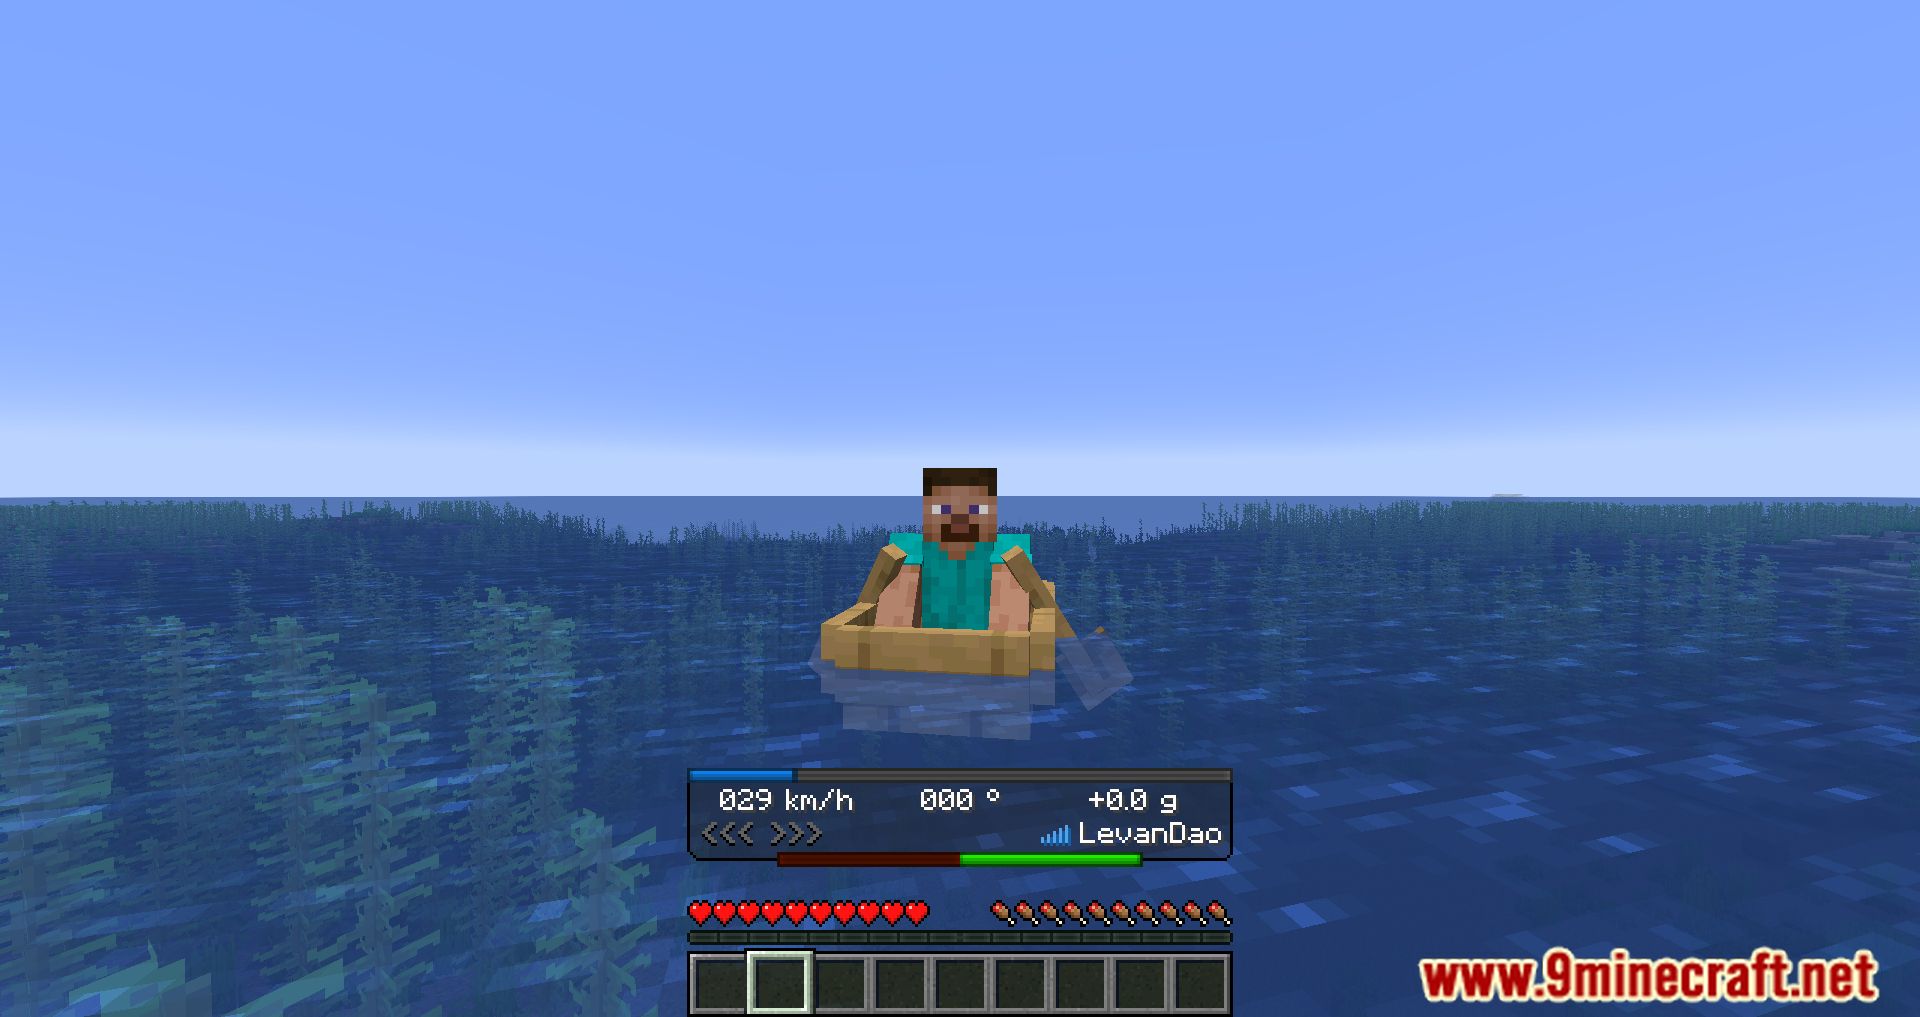 Boat Hud Mod (1.19.4, 1.18.2) - Display The Information Of The Boat 9